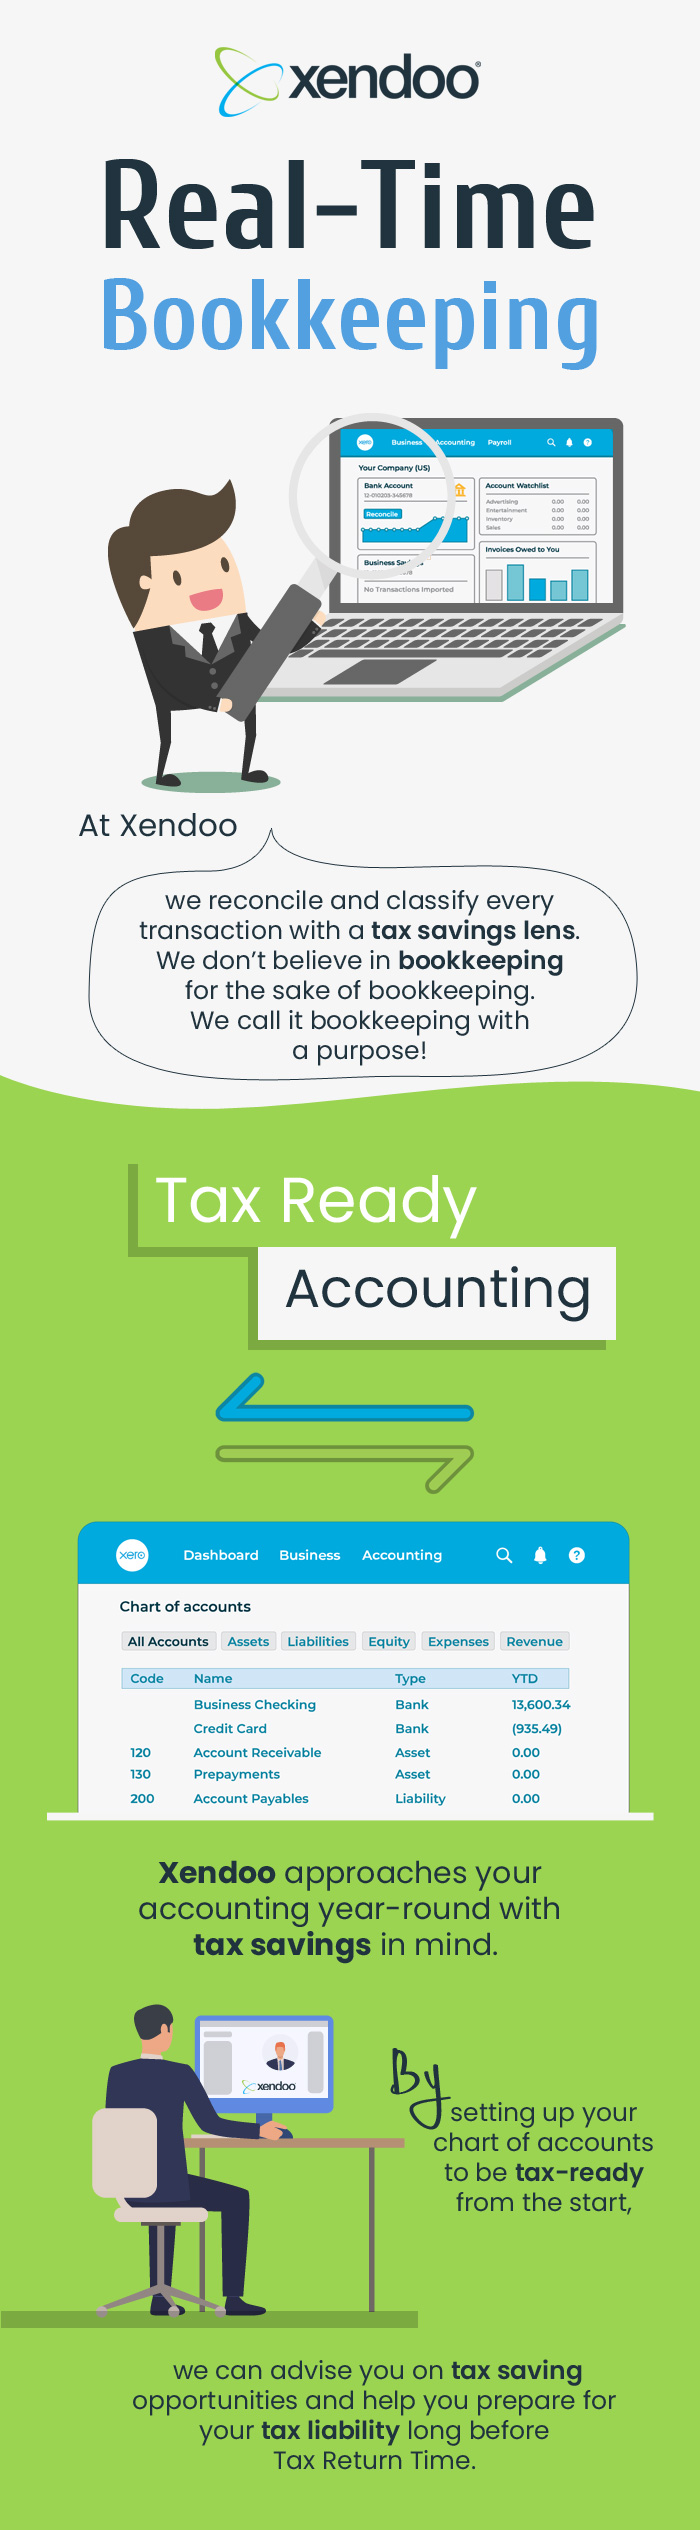 Choose Xendoo for Real-Time Bookkeeping Services in the USA